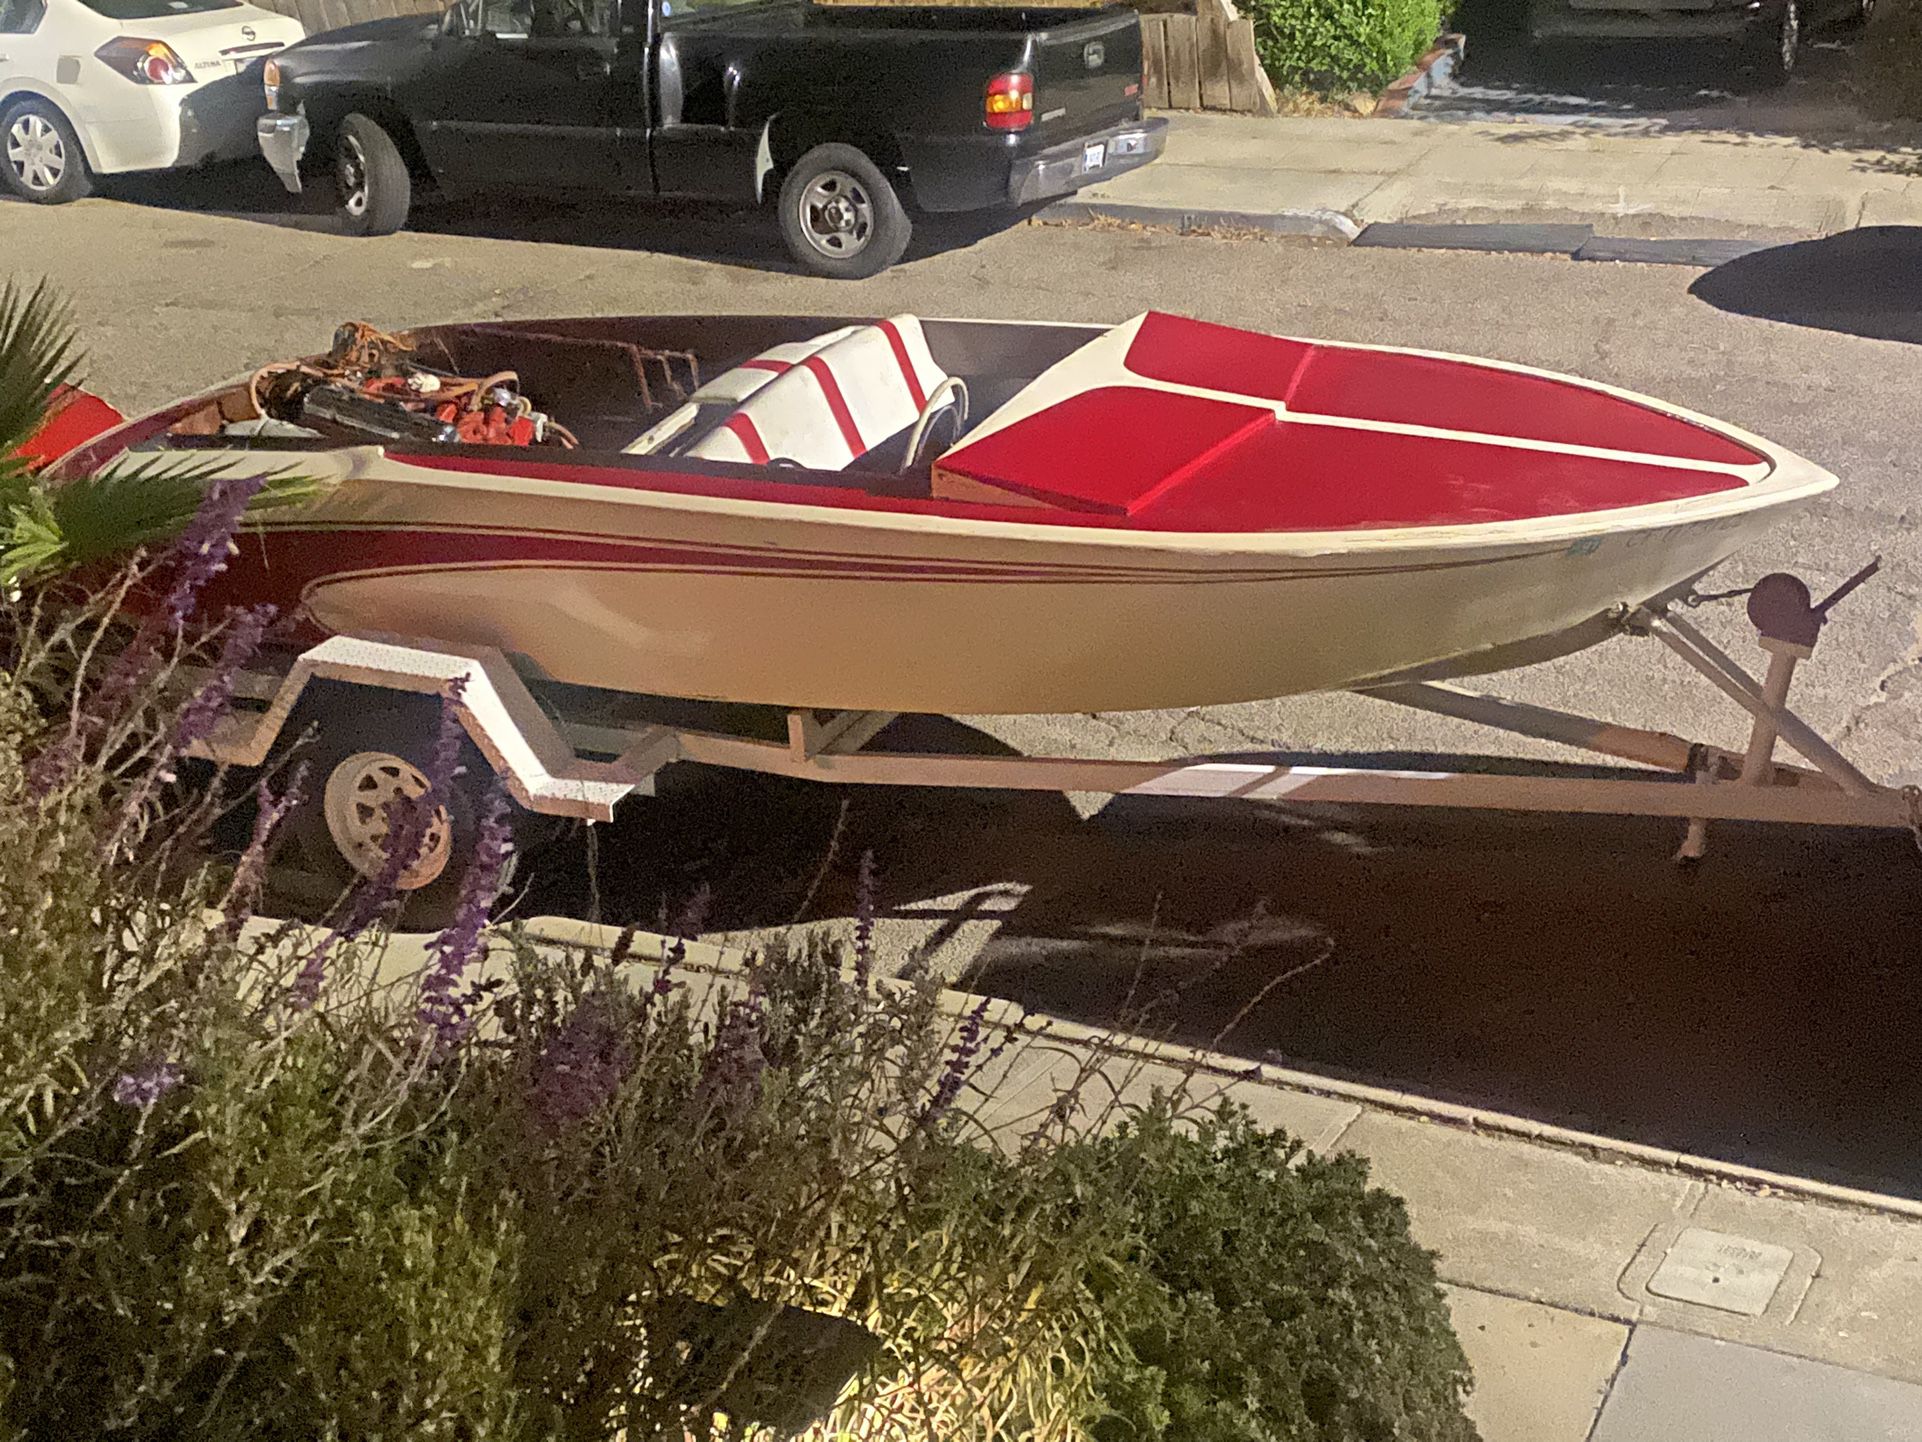 Small block Chevy fast runabout, Boat